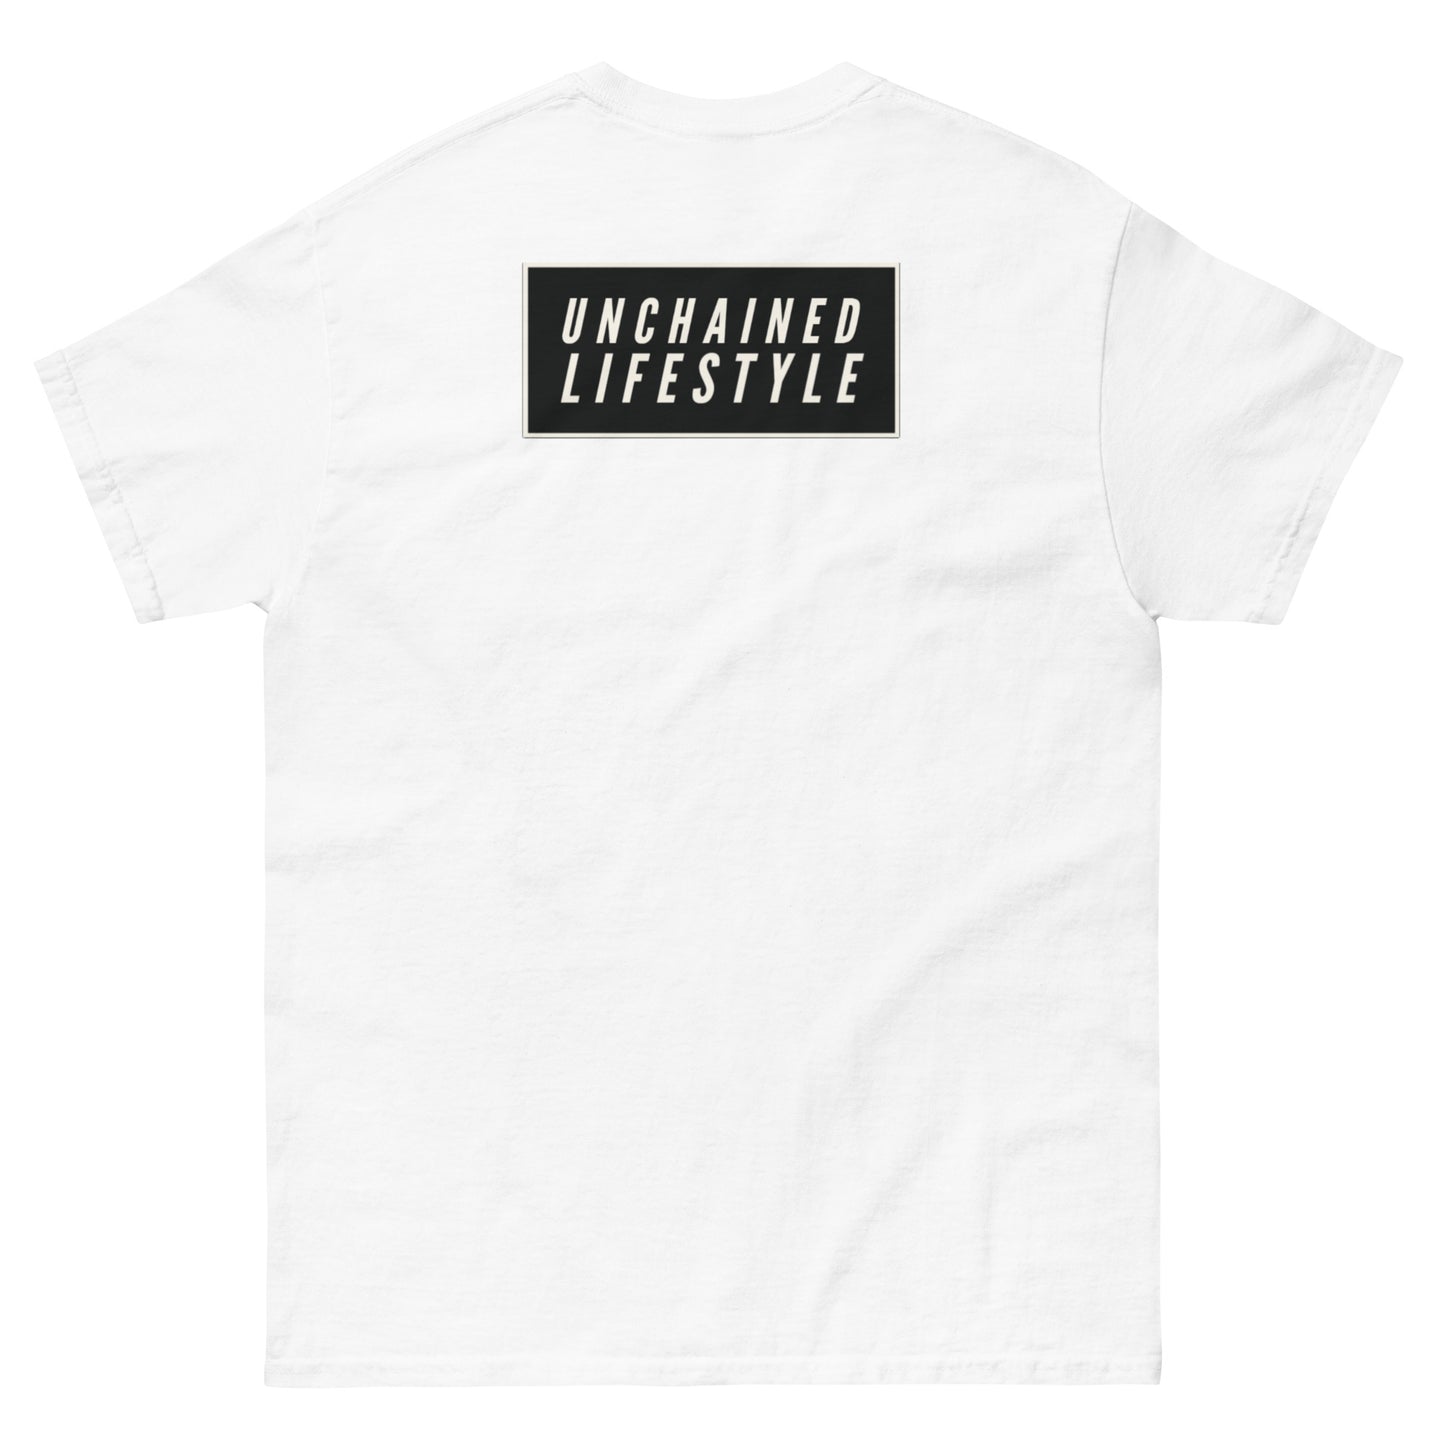 Unchained Lifestyle Car tee